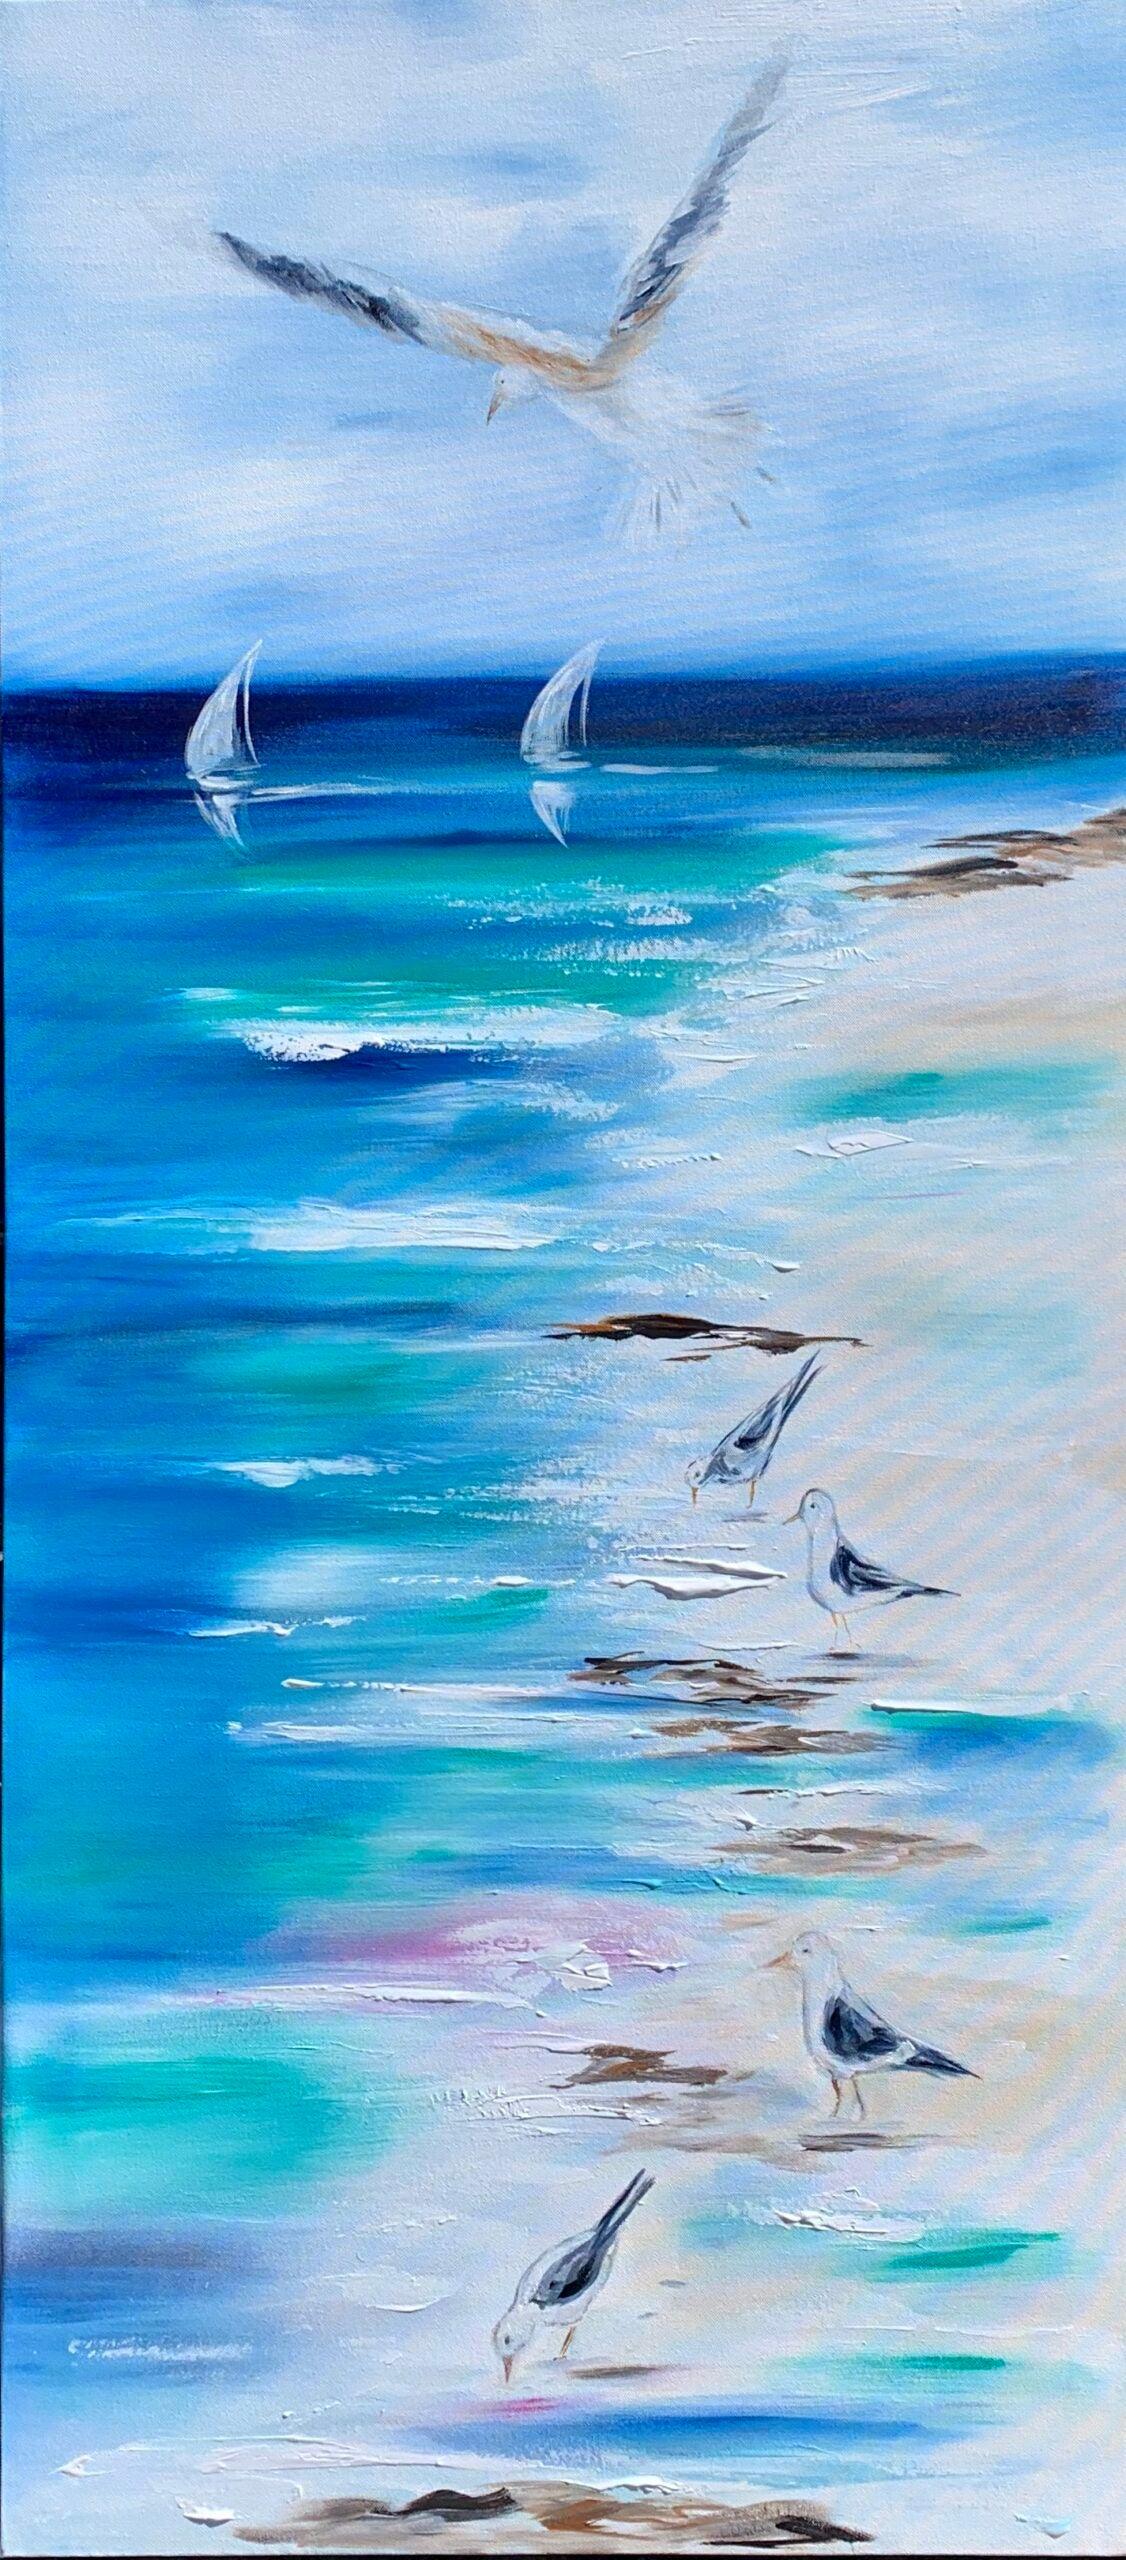 Beach Vibes - Seagulls Flying Freely